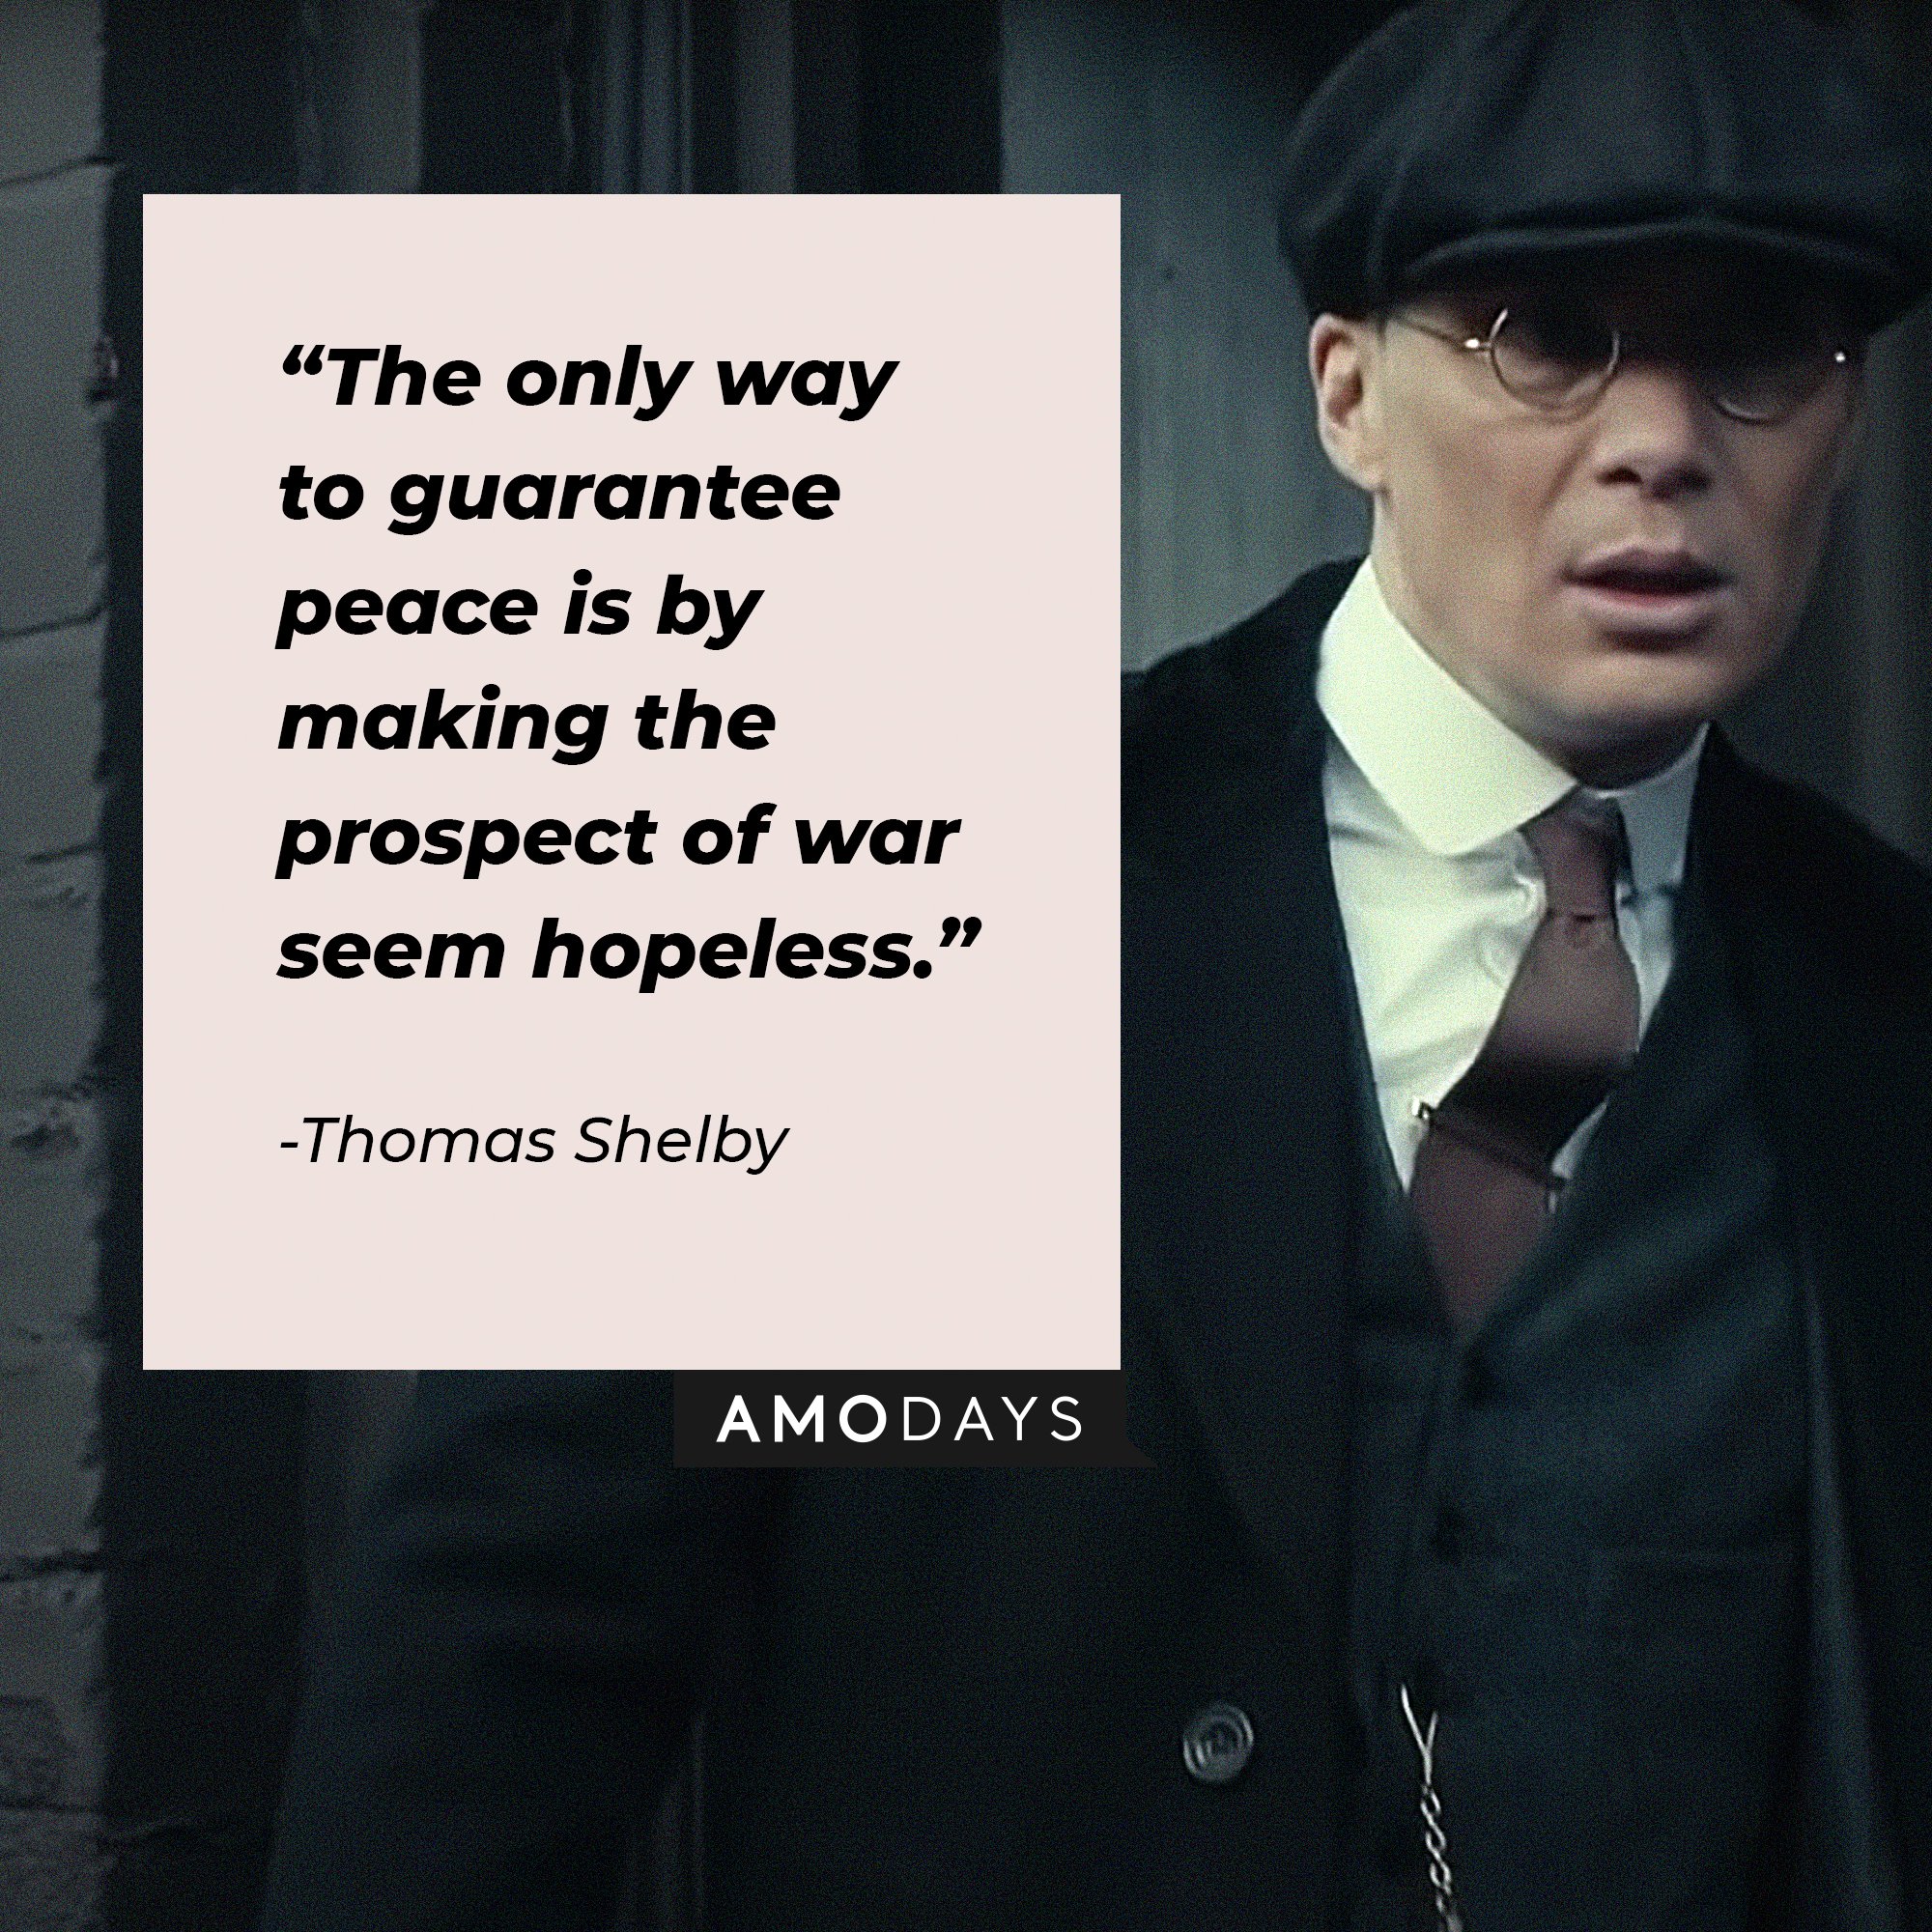 Thomas Shelby's quote: “The only way to guarantee peace is by making the prospect of war seem hopeless.”  | Image: AmoDays